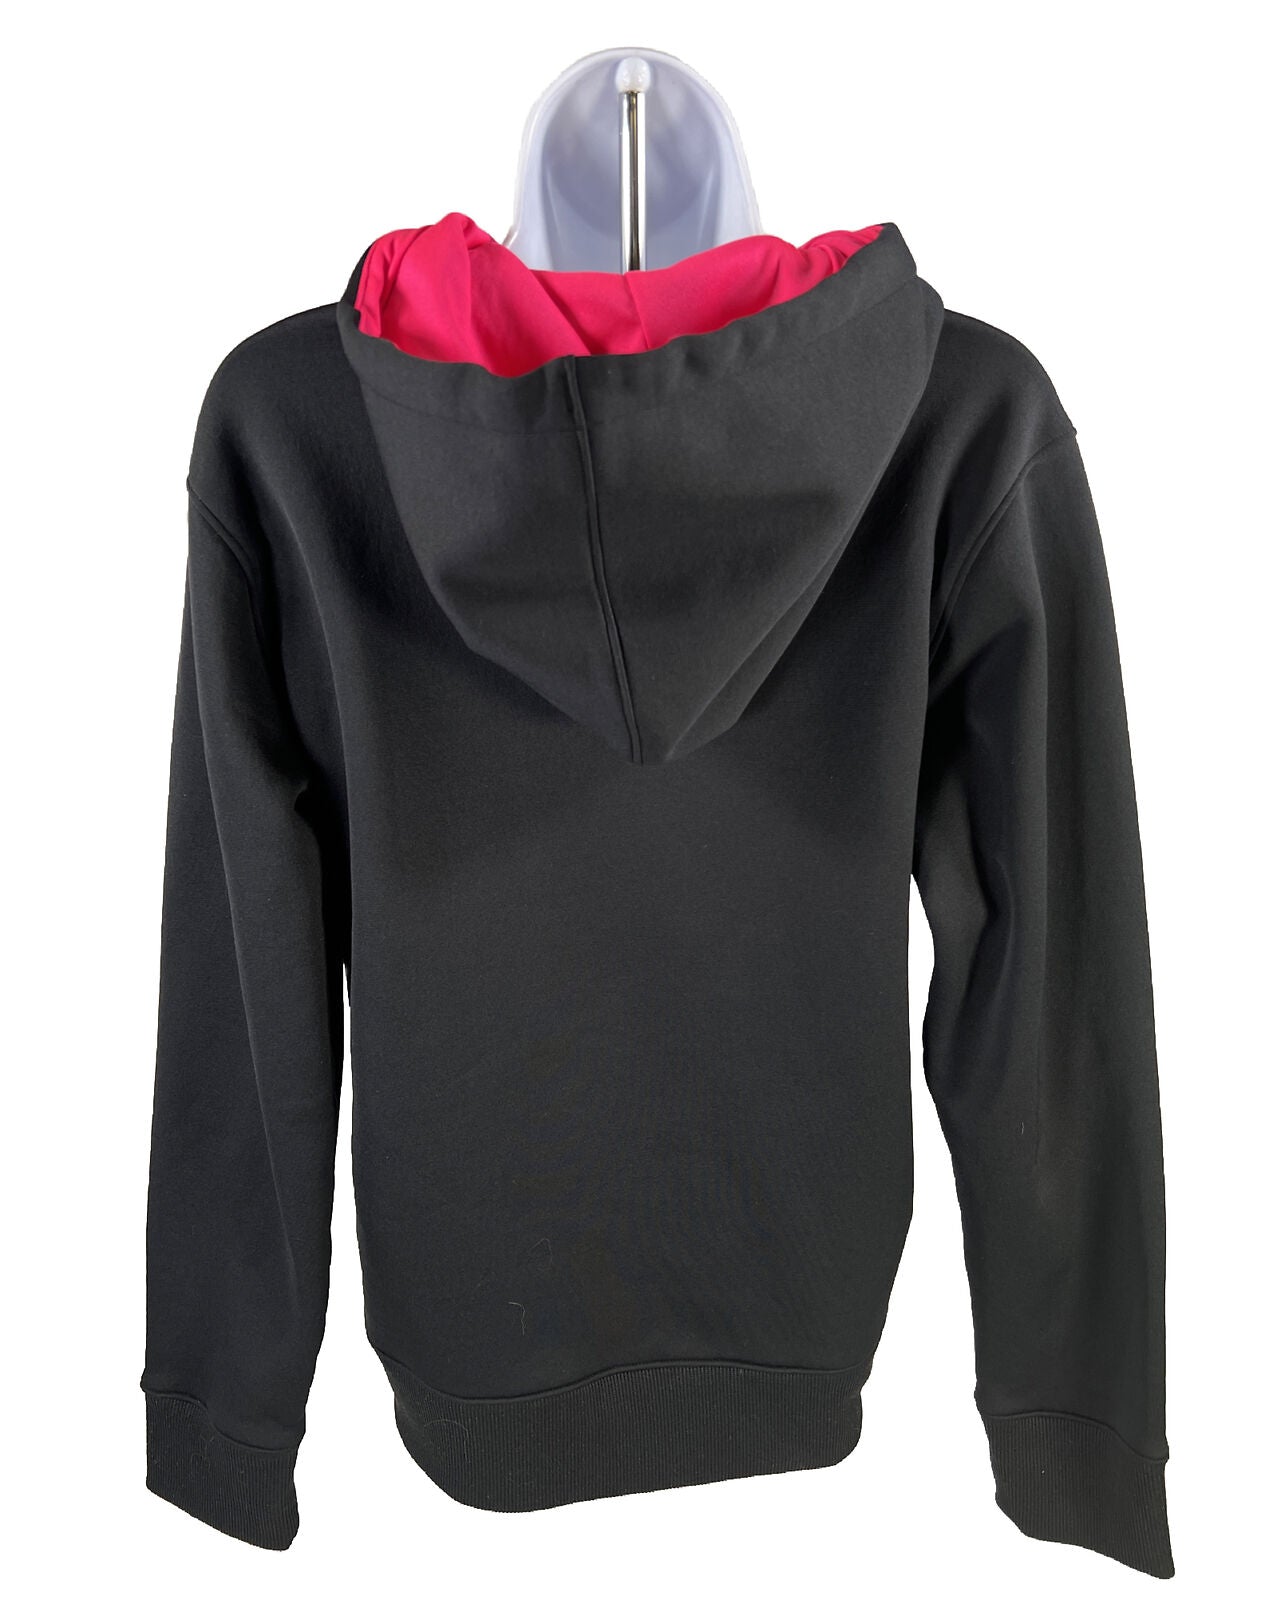 Under Armour Women's Black/Pink Logo Front Pullover Hoodie - S